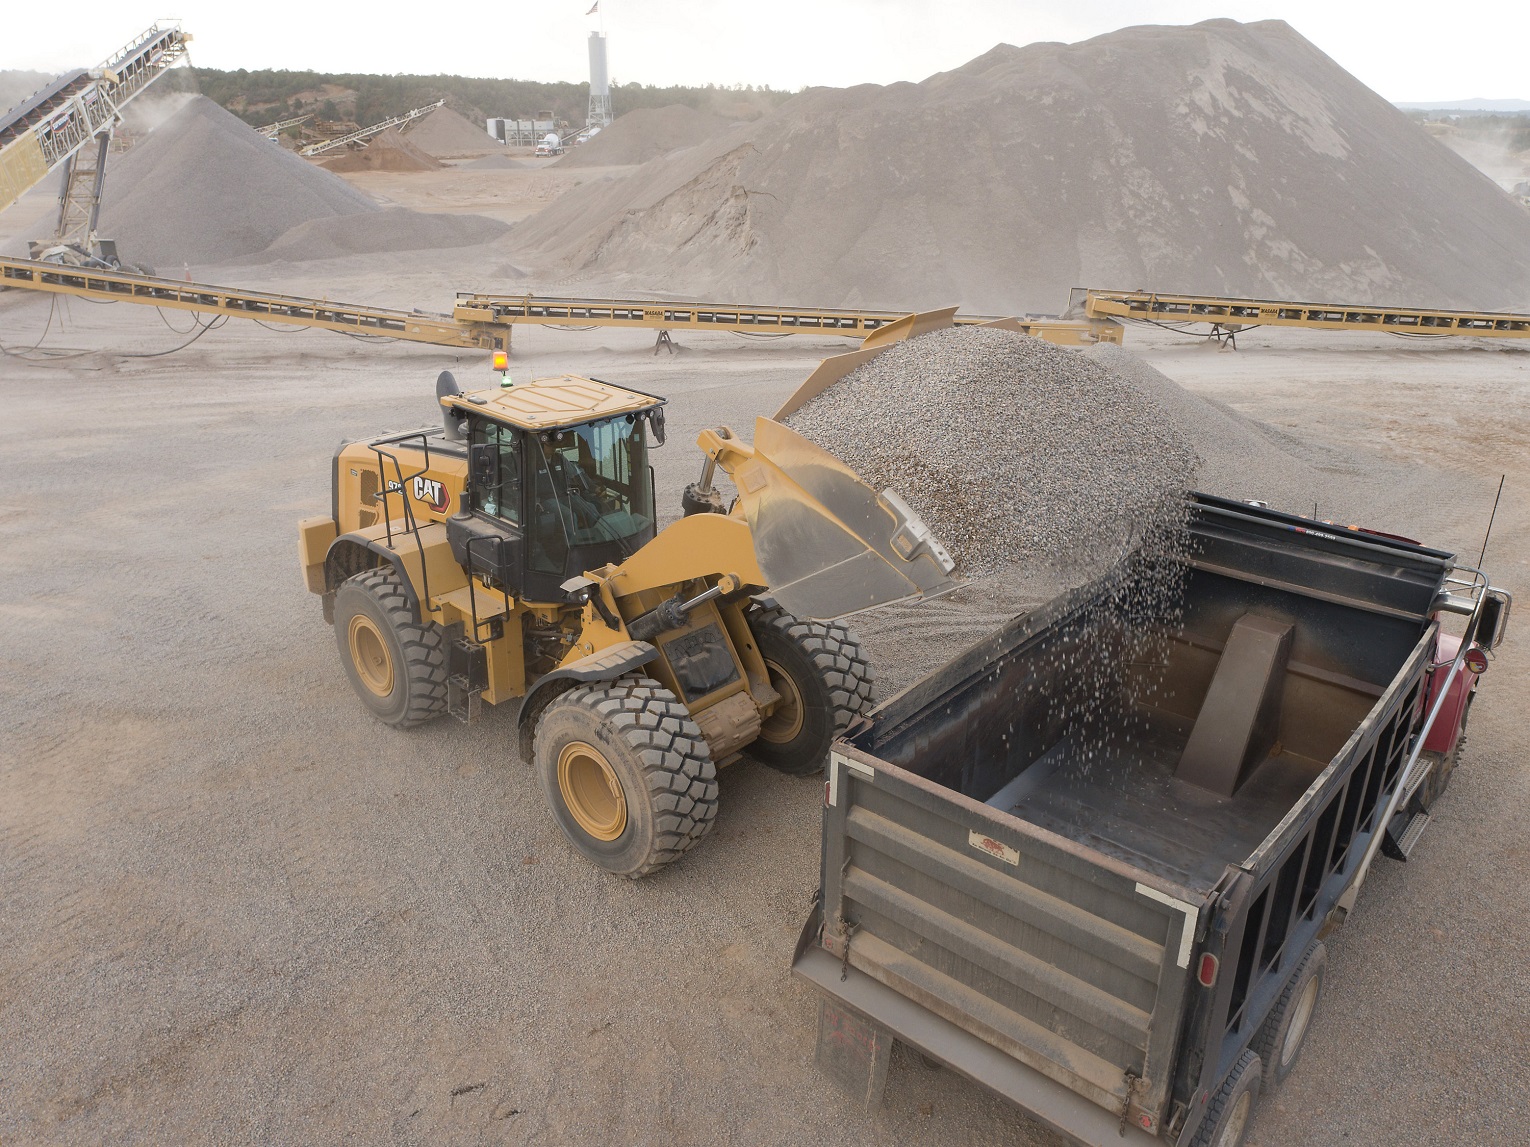 Cat has updated its 972 wheeled loader with new technologies to boost efficiency and productivity